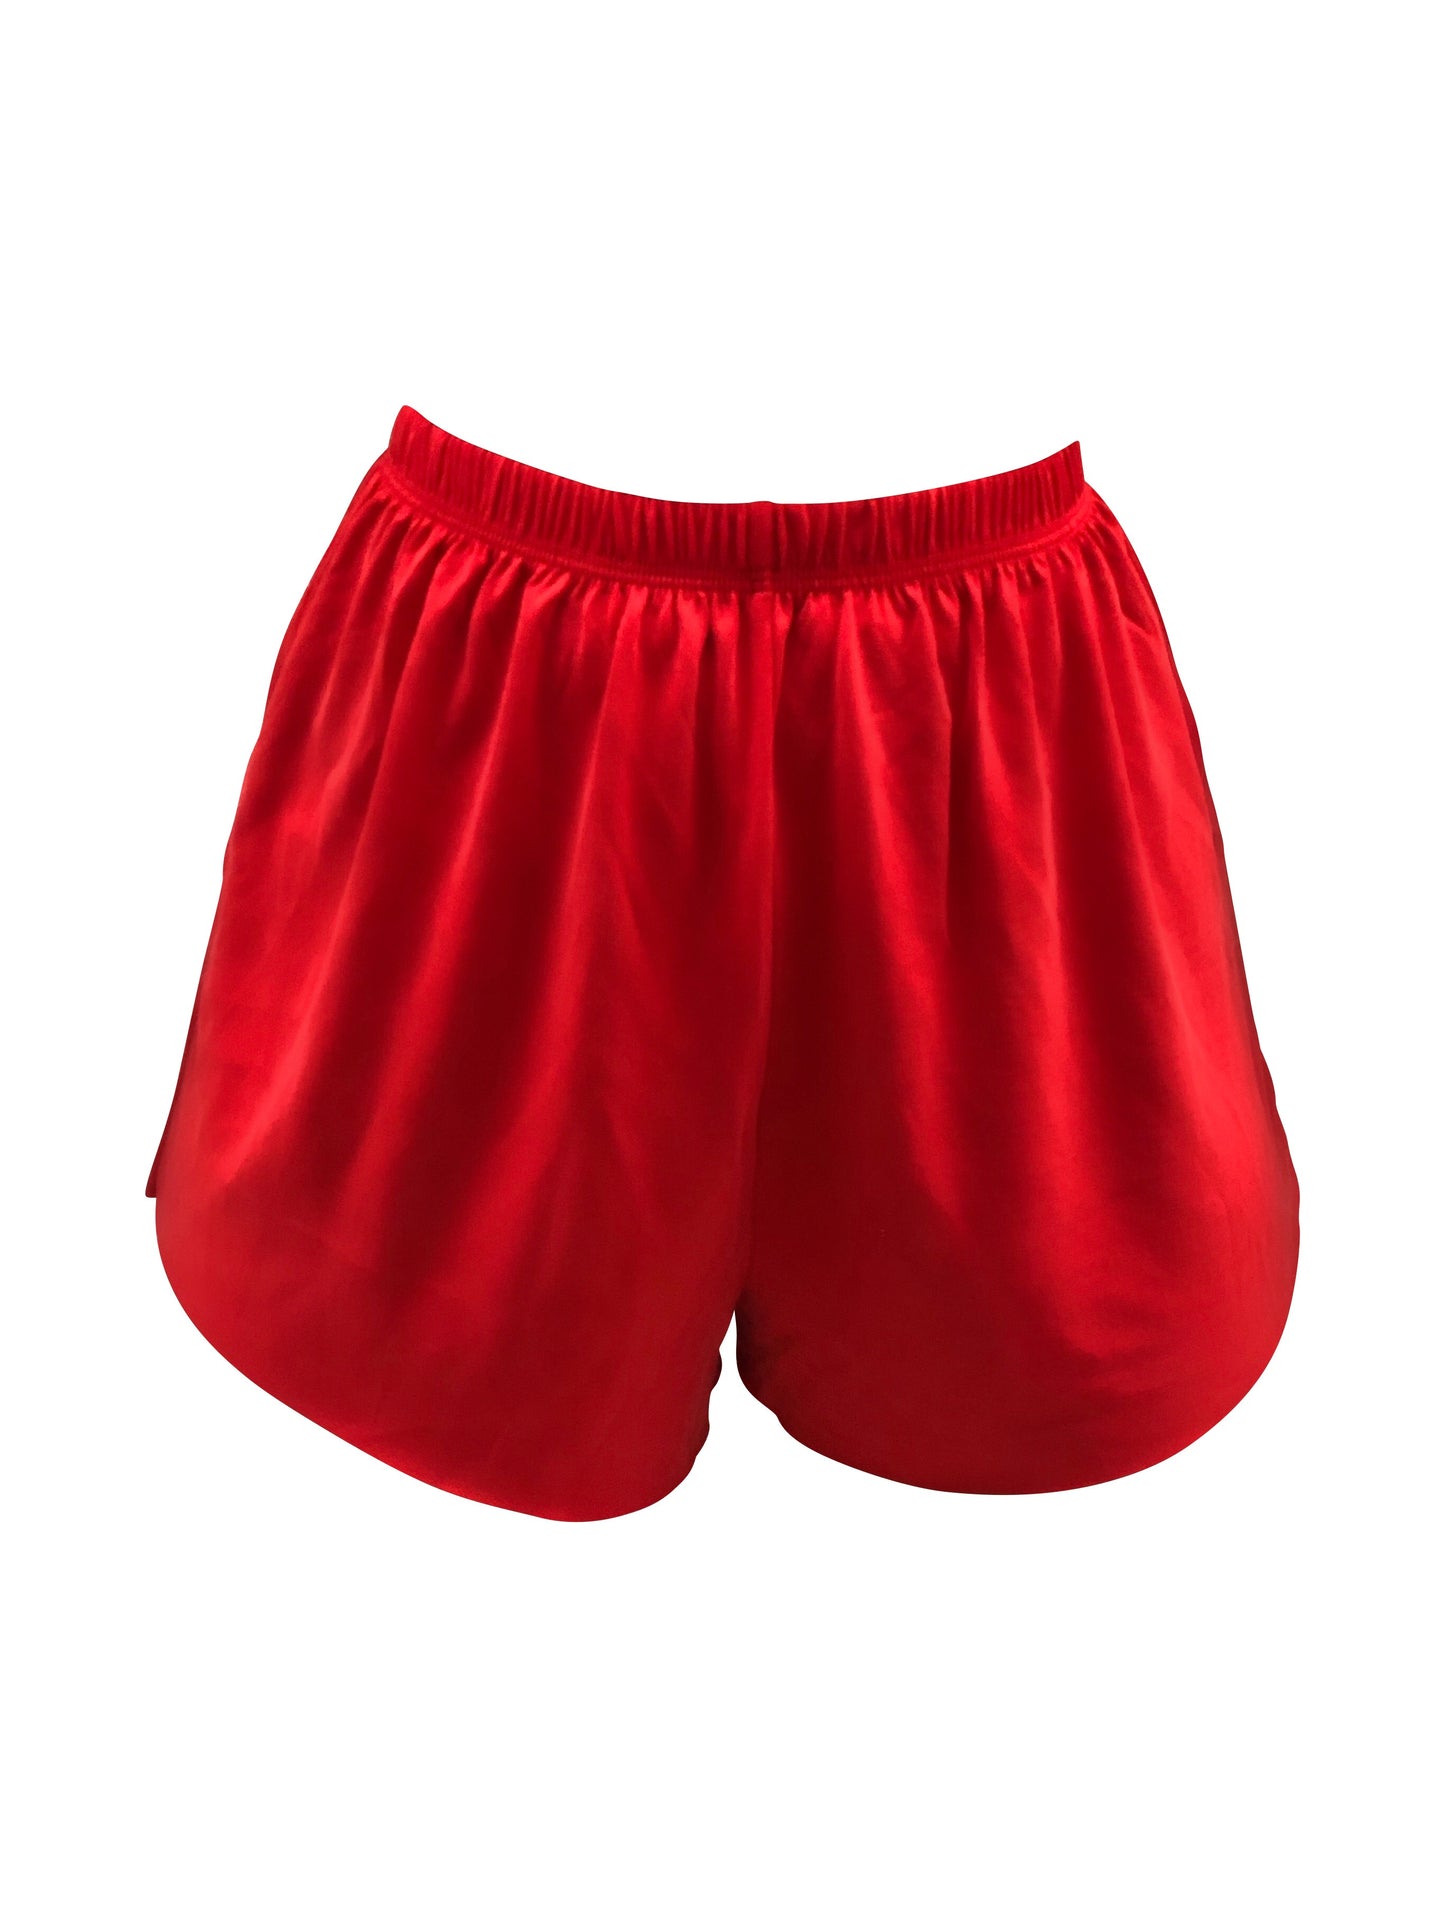 WOMENS RED LOUNGE SHORTS - 8586